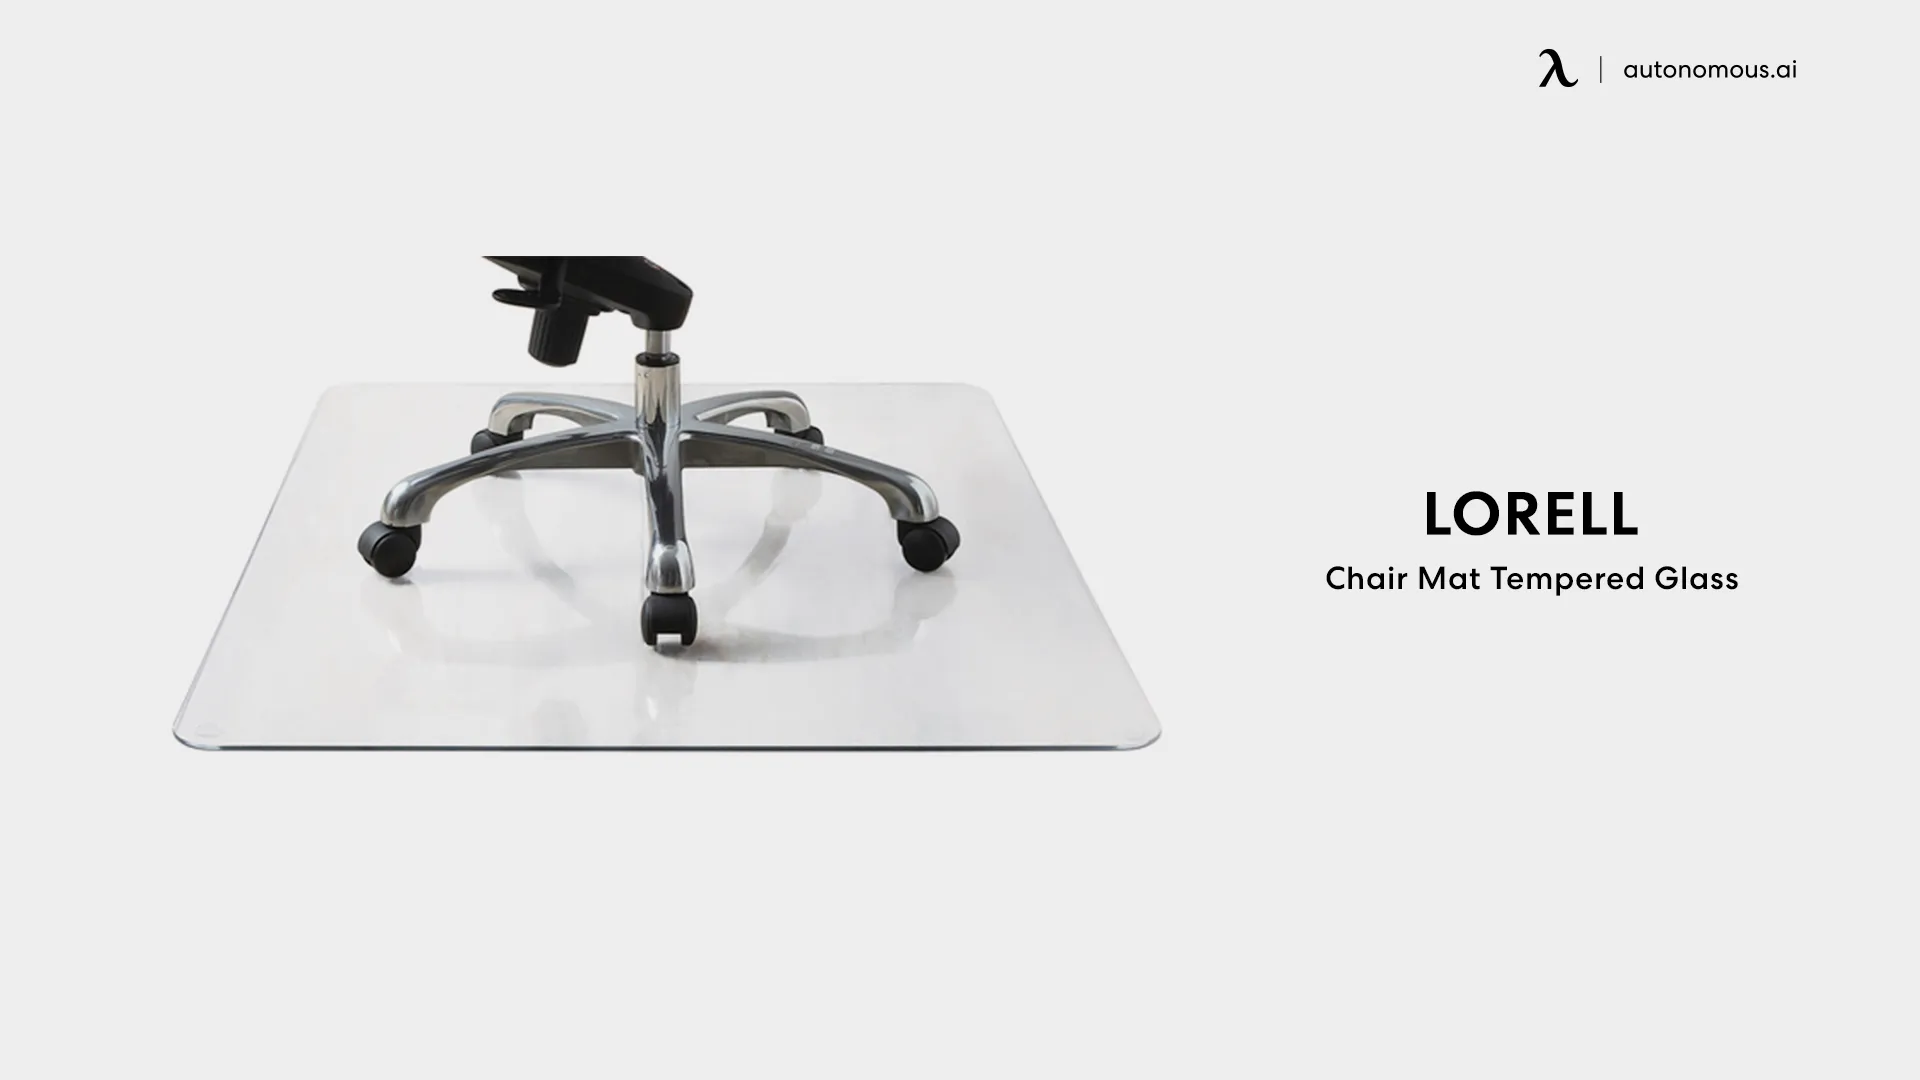 Chair Mat for Lorell Tempered Glass